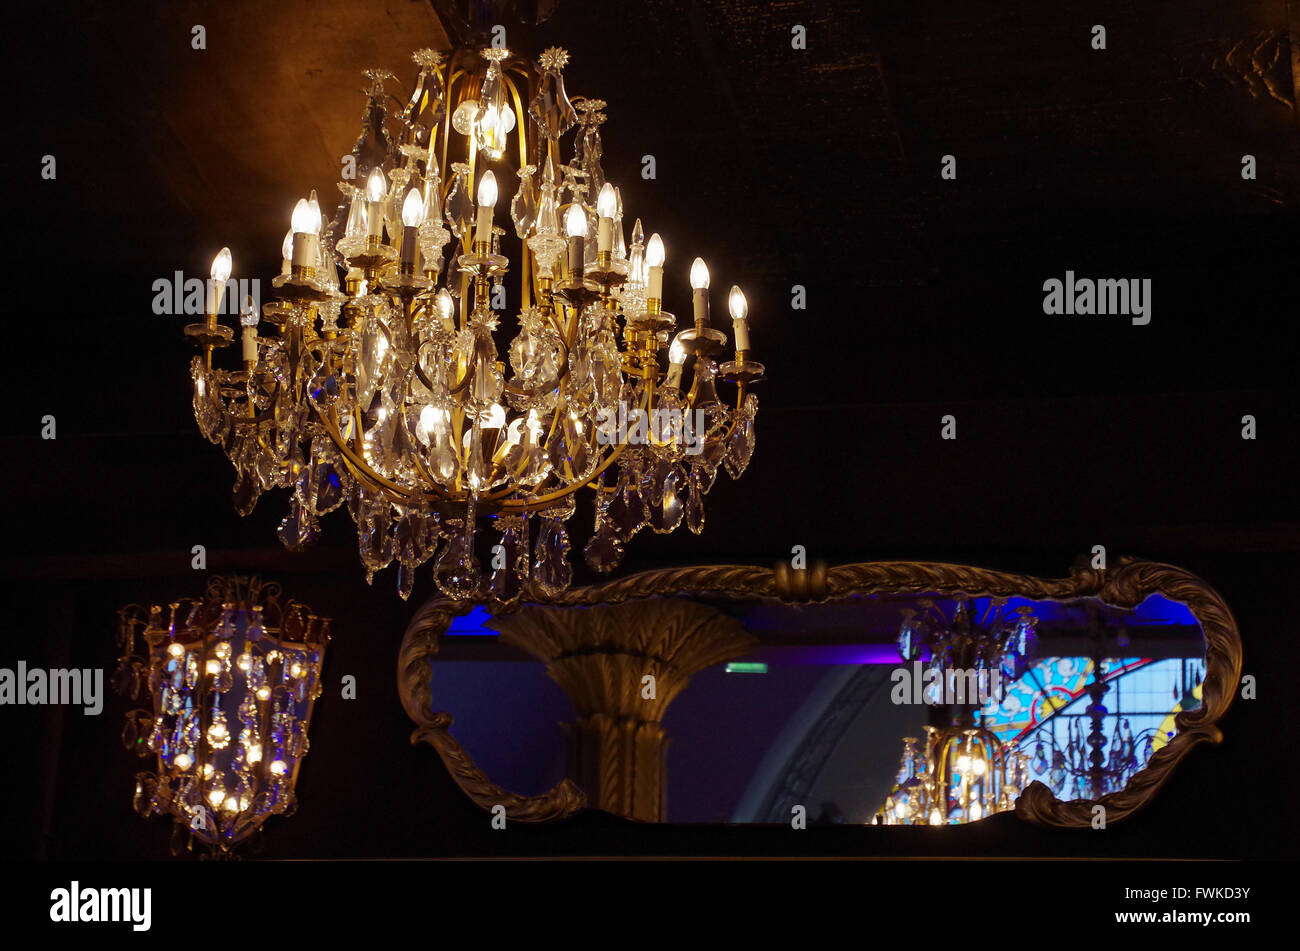 Chandelier of the Casino de Paris reflecting in several mirrors Stock Photo